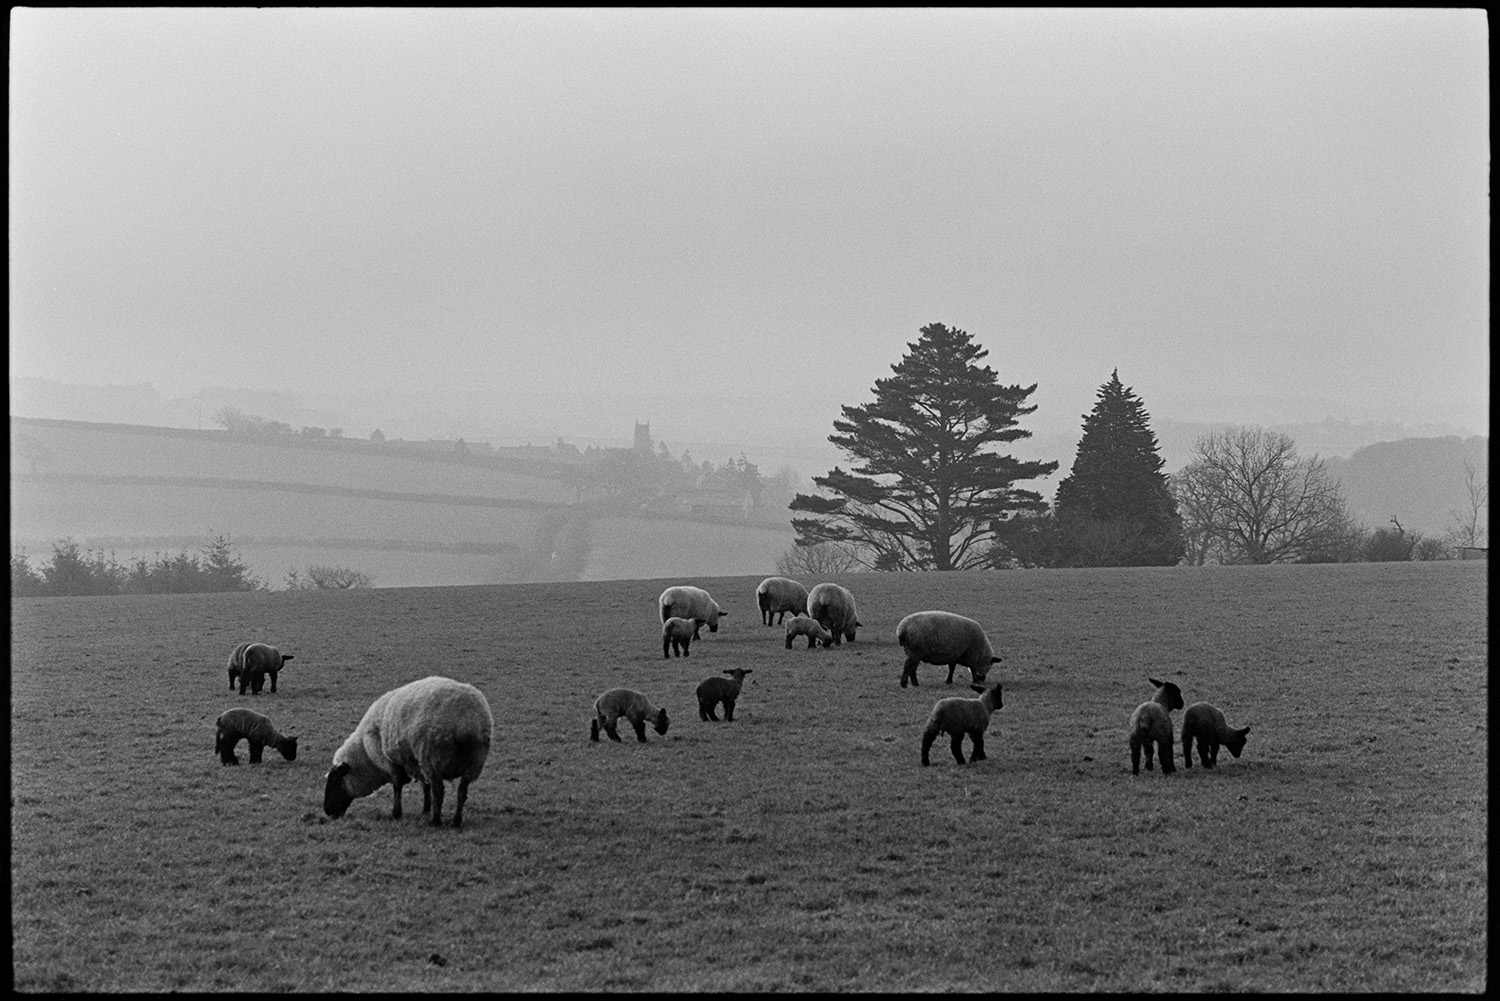 Sheep, ewes and lambs in field. 
[Ewes and lambs grazing in a field at Berry Cross, Iddesleigh. Trees can be seen in the background.]